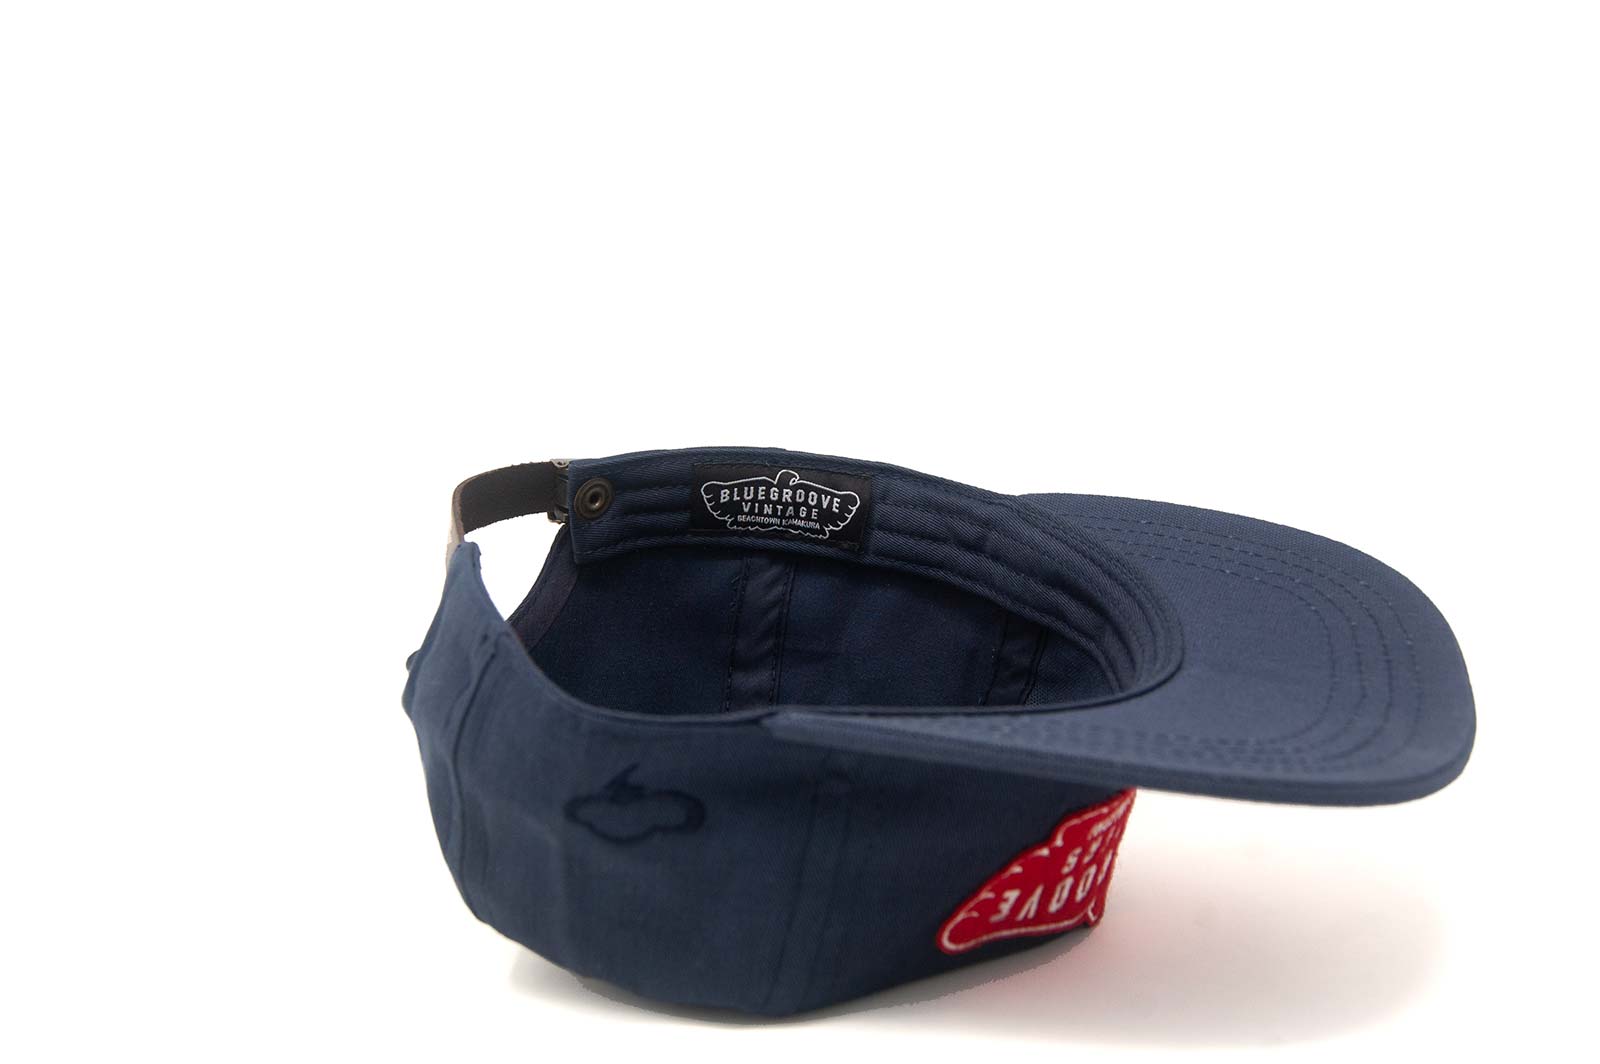 Ampal x BLUE GROOVE CHOPPERS Strapback - Navy